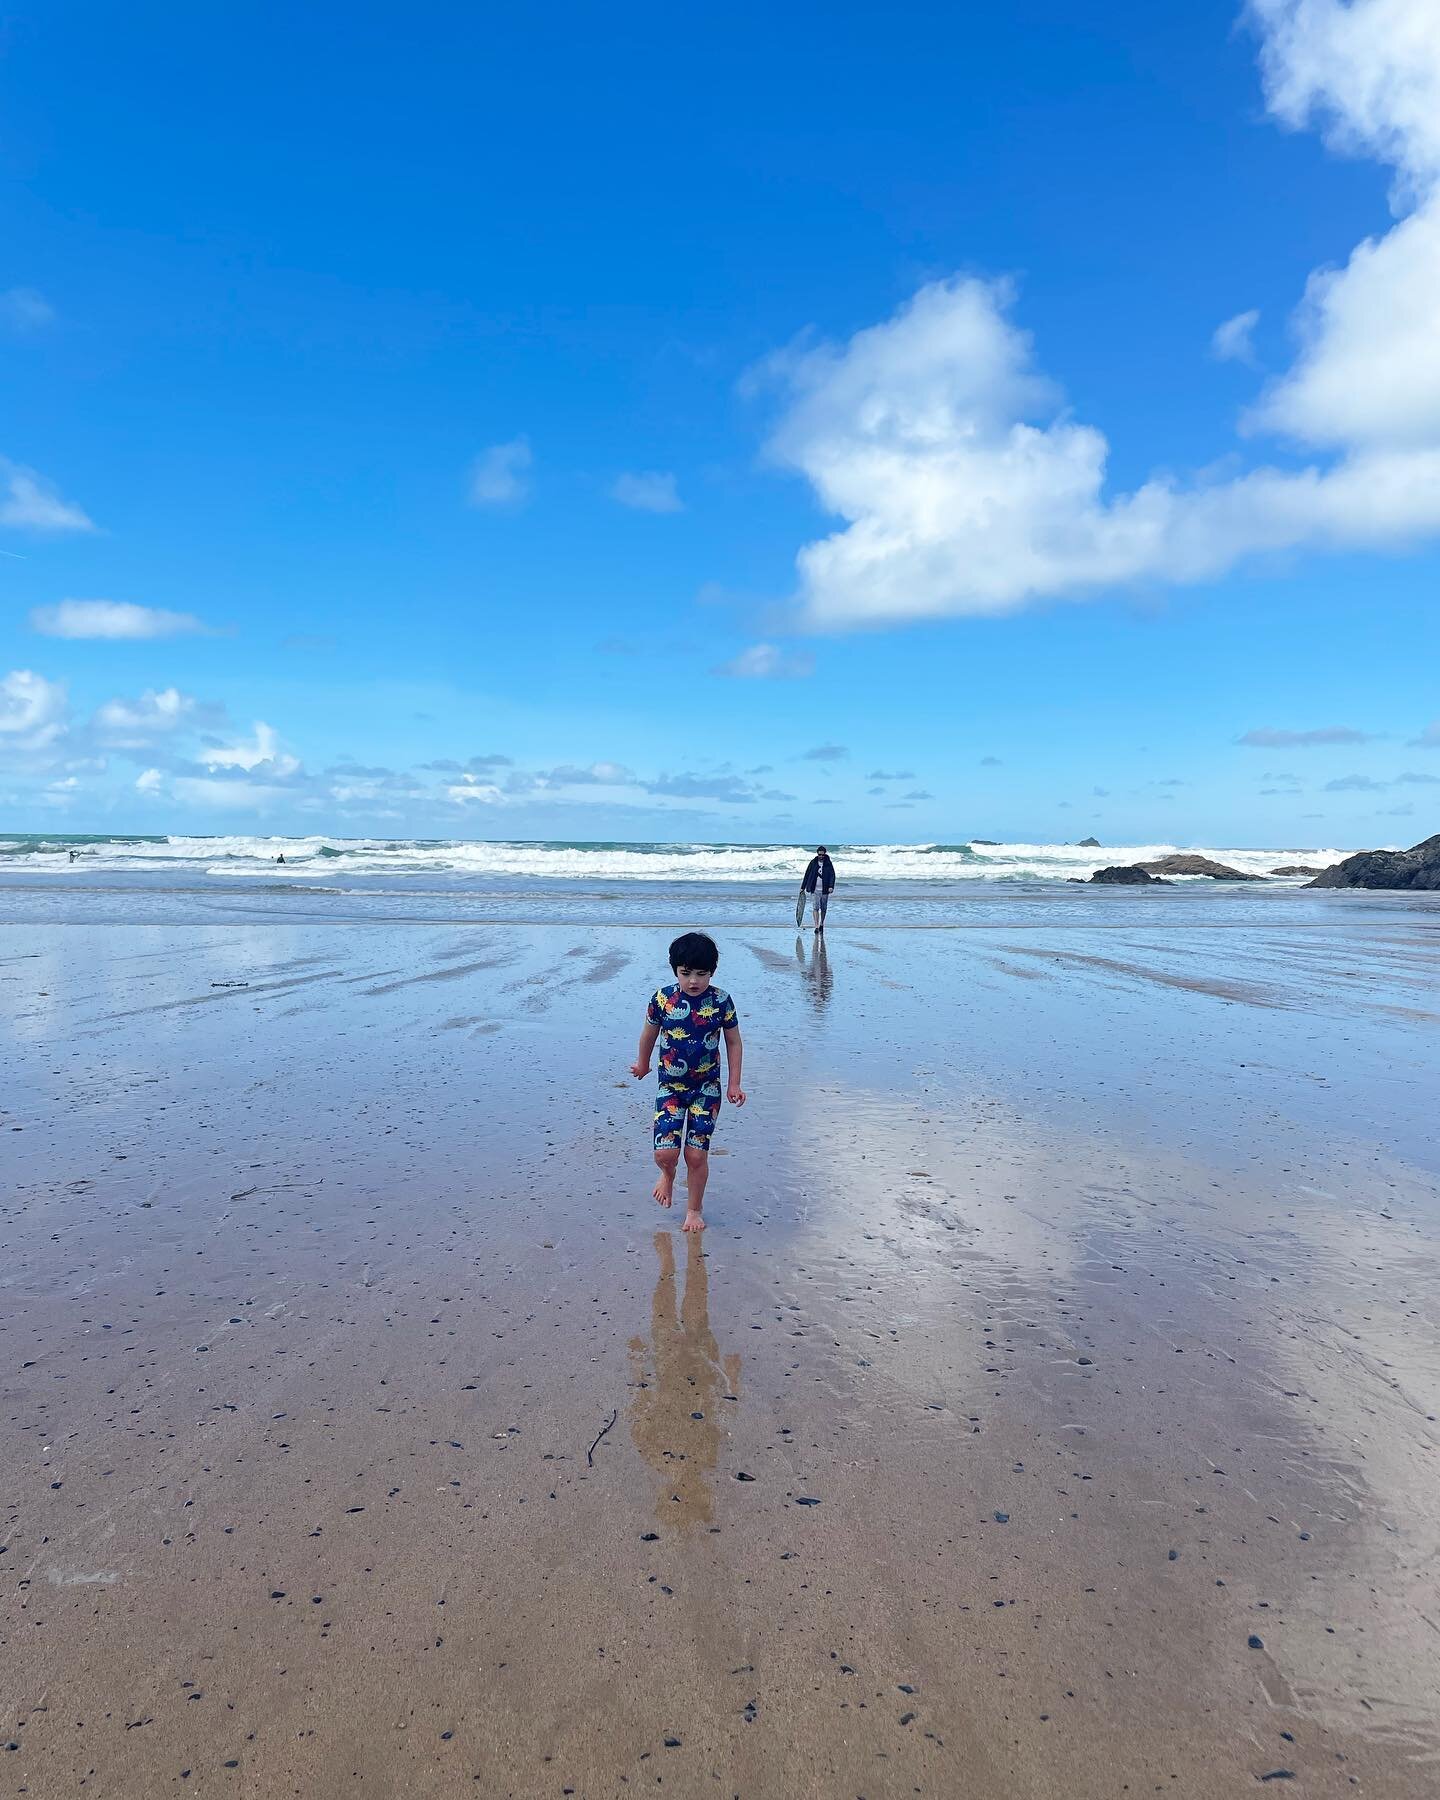 Total beach reset 🌊 I love it in Cornwall (and being on holiday in general) especially this part on the north coast between Padstow - Newquay.

Beaches were great, food was great, even the kids were great. 

Holidays with kids = less lying on the be